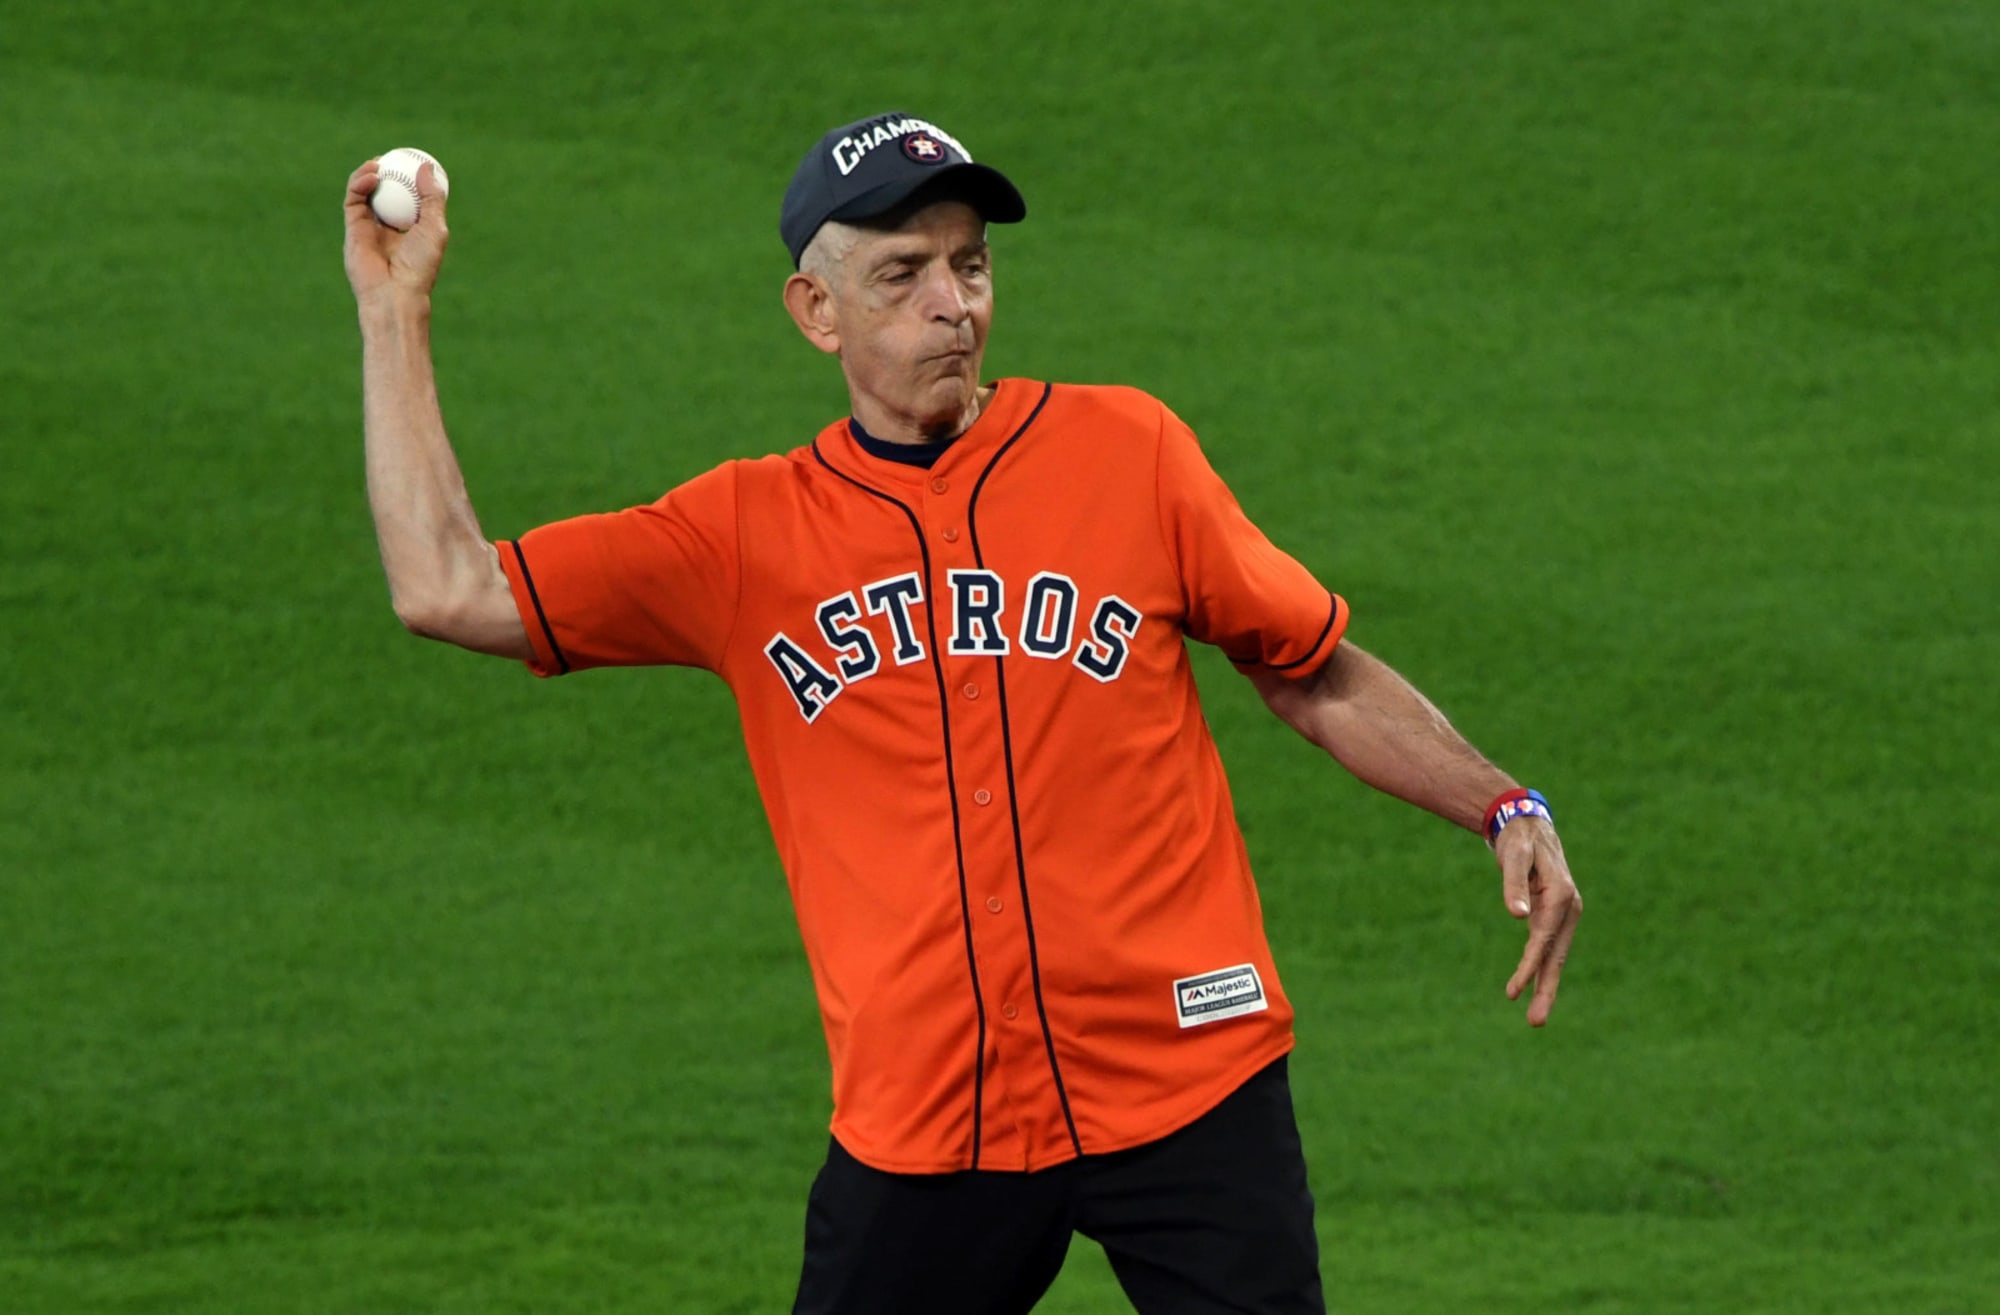 Mattress Mack could win record World Series bet on Houston Astros this season